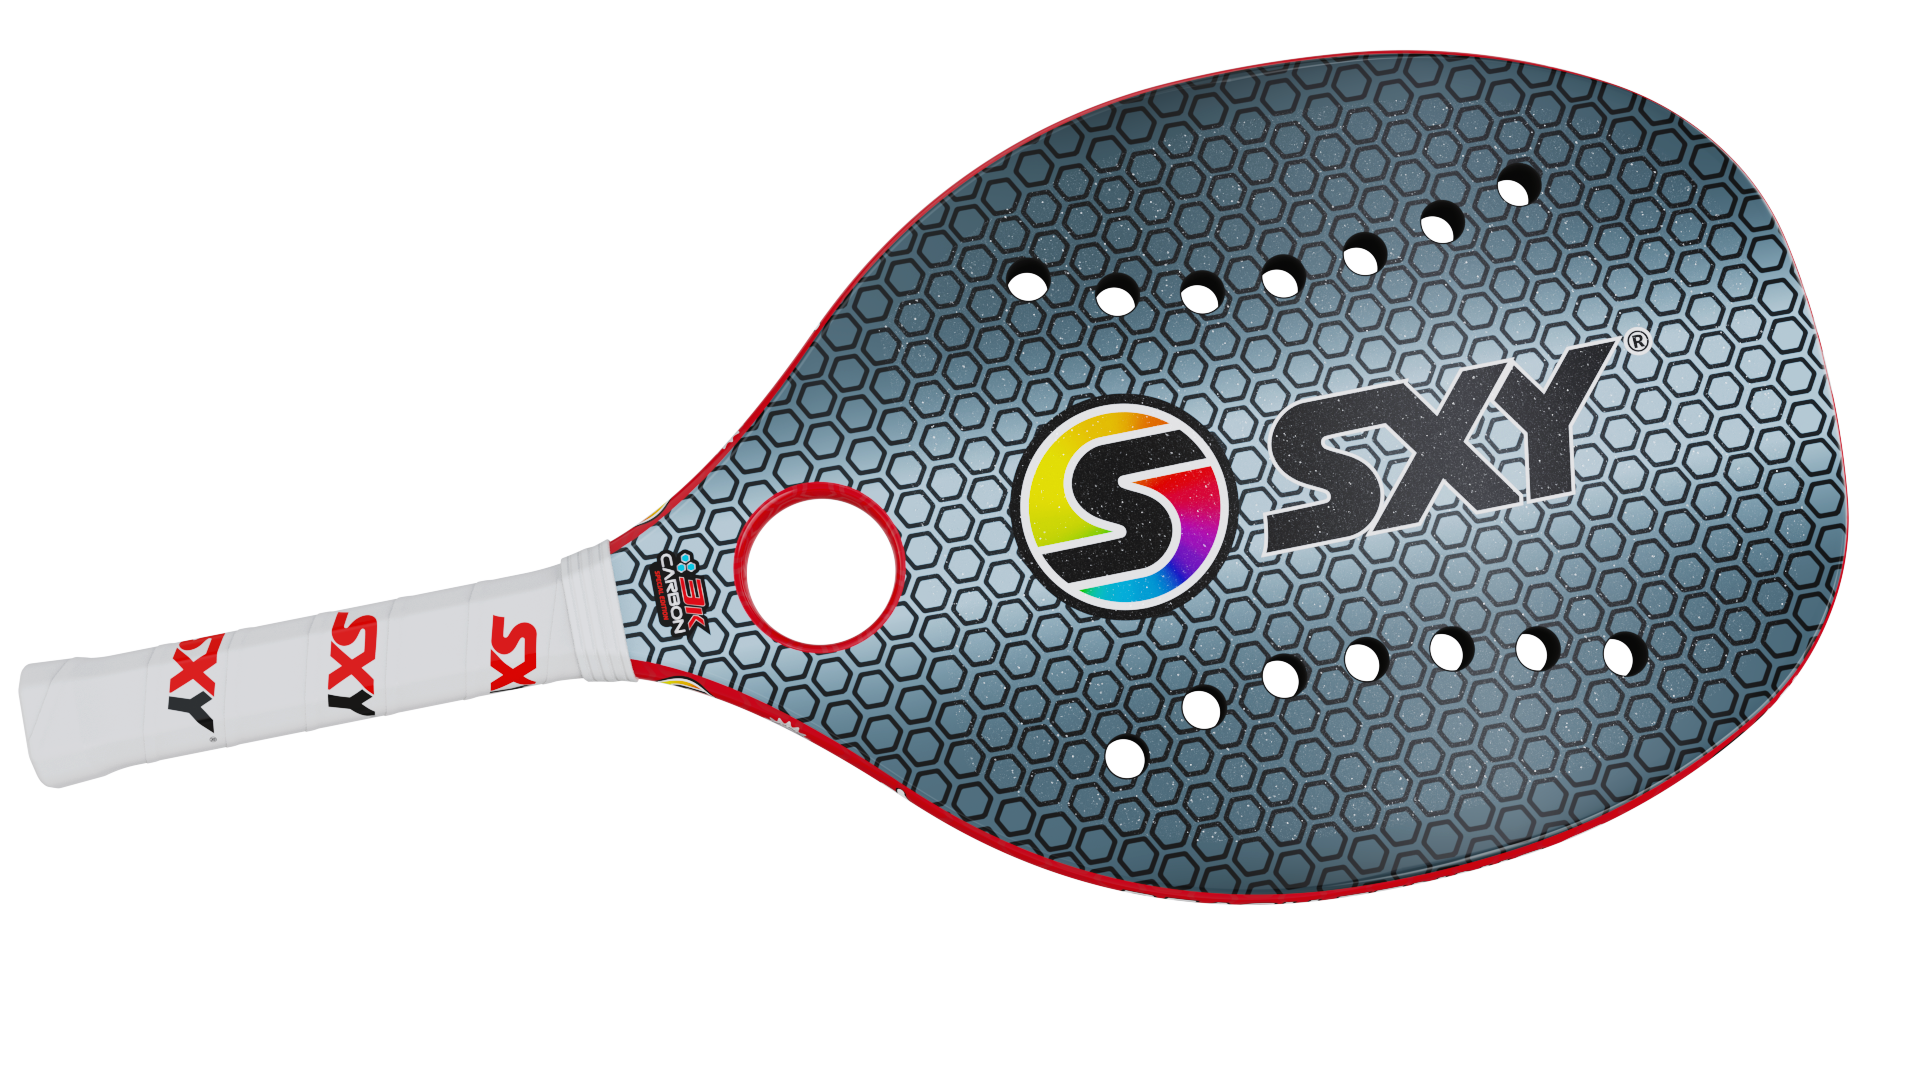 Carbon Hex 𝘎𝘛 - Sample Paddle